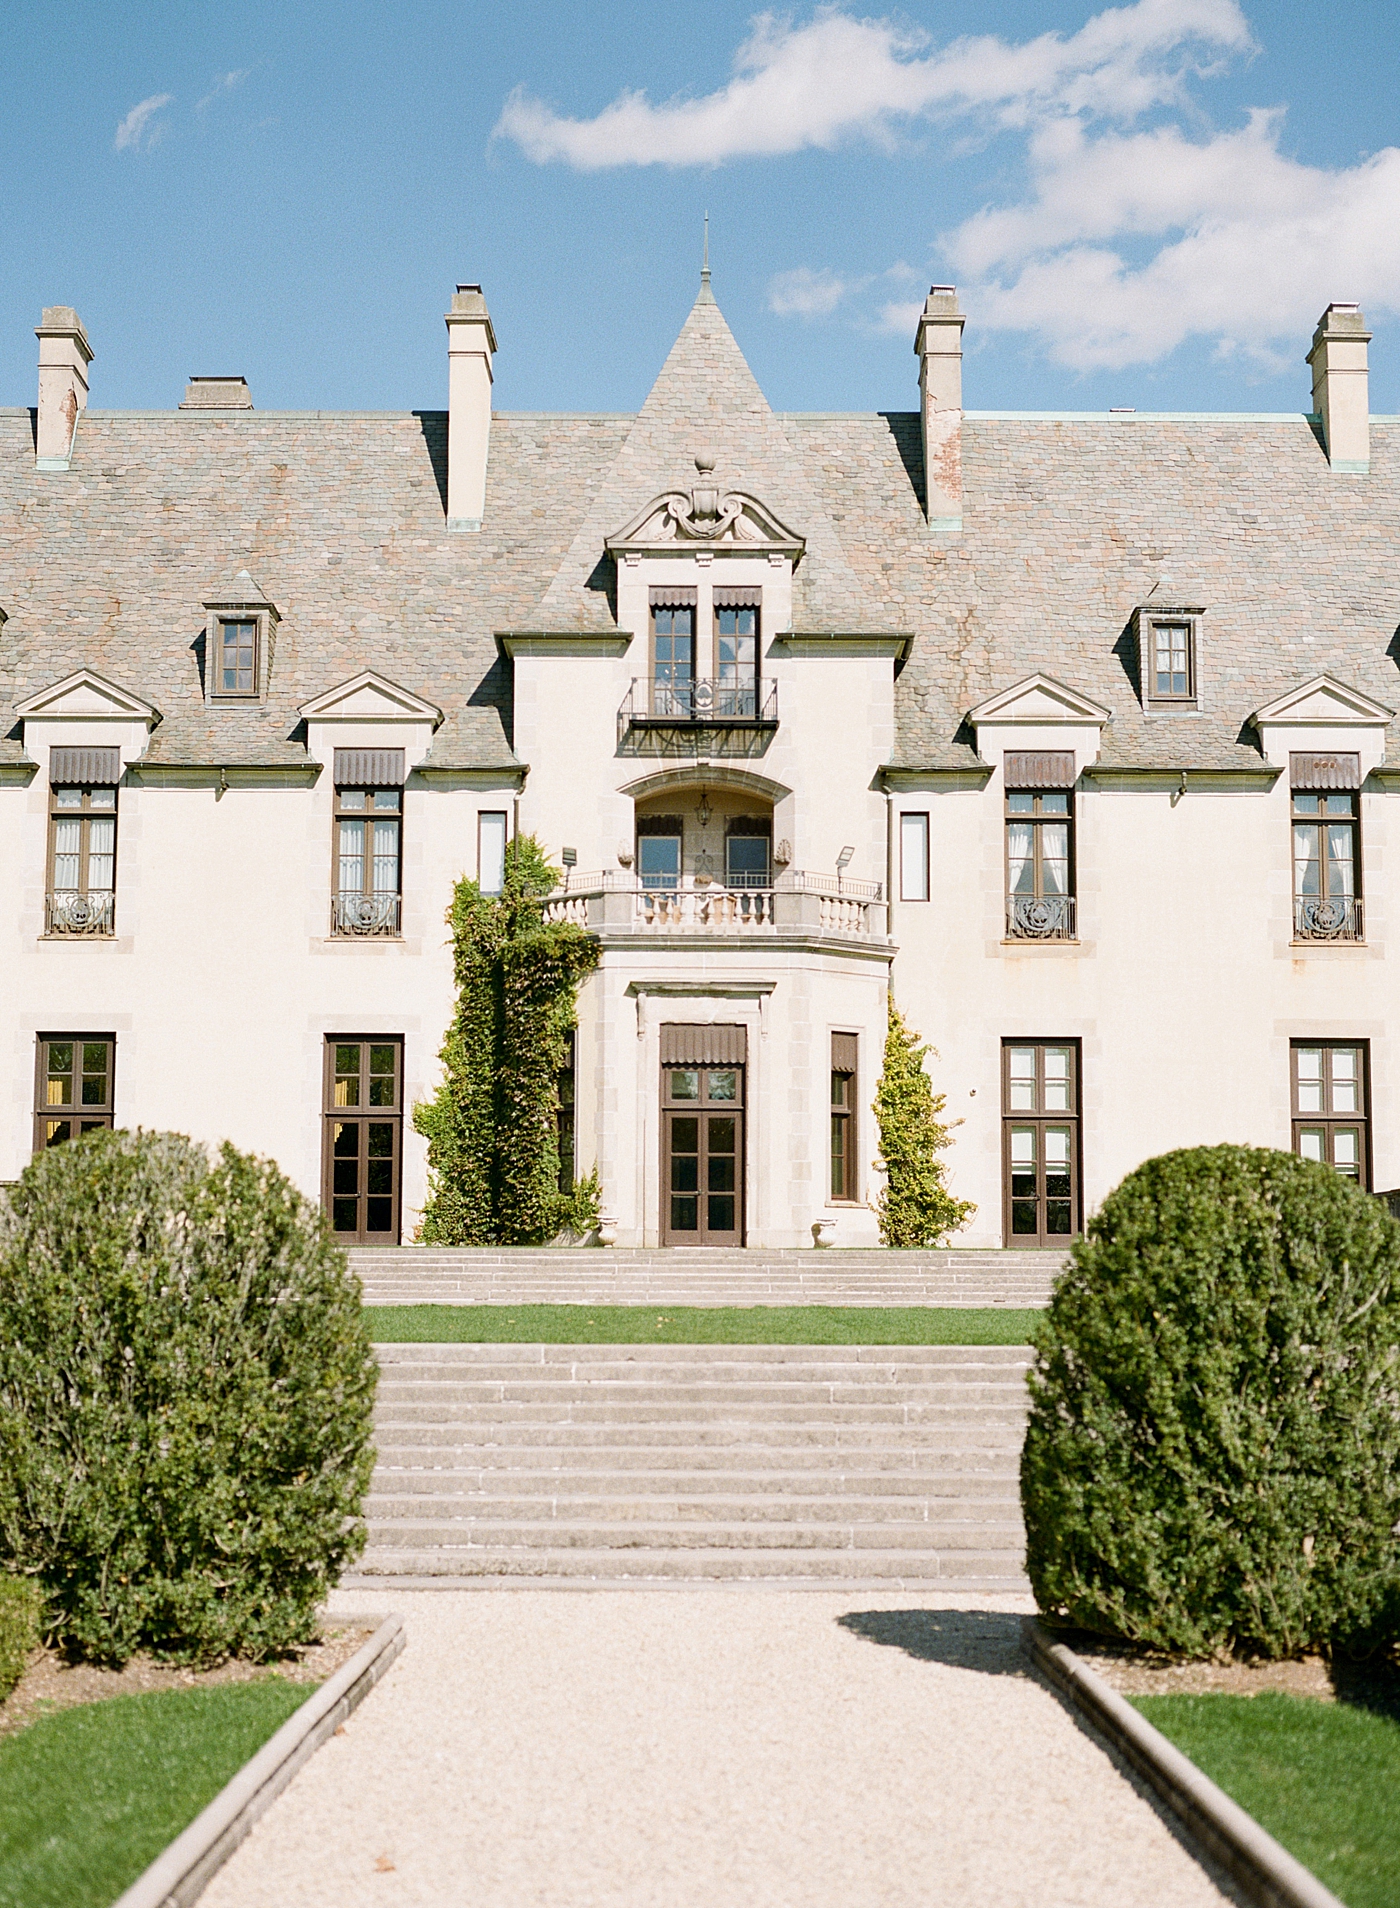 Vignette of the entrance of a castle in bright sun | Image by Hope Helmuth Photography